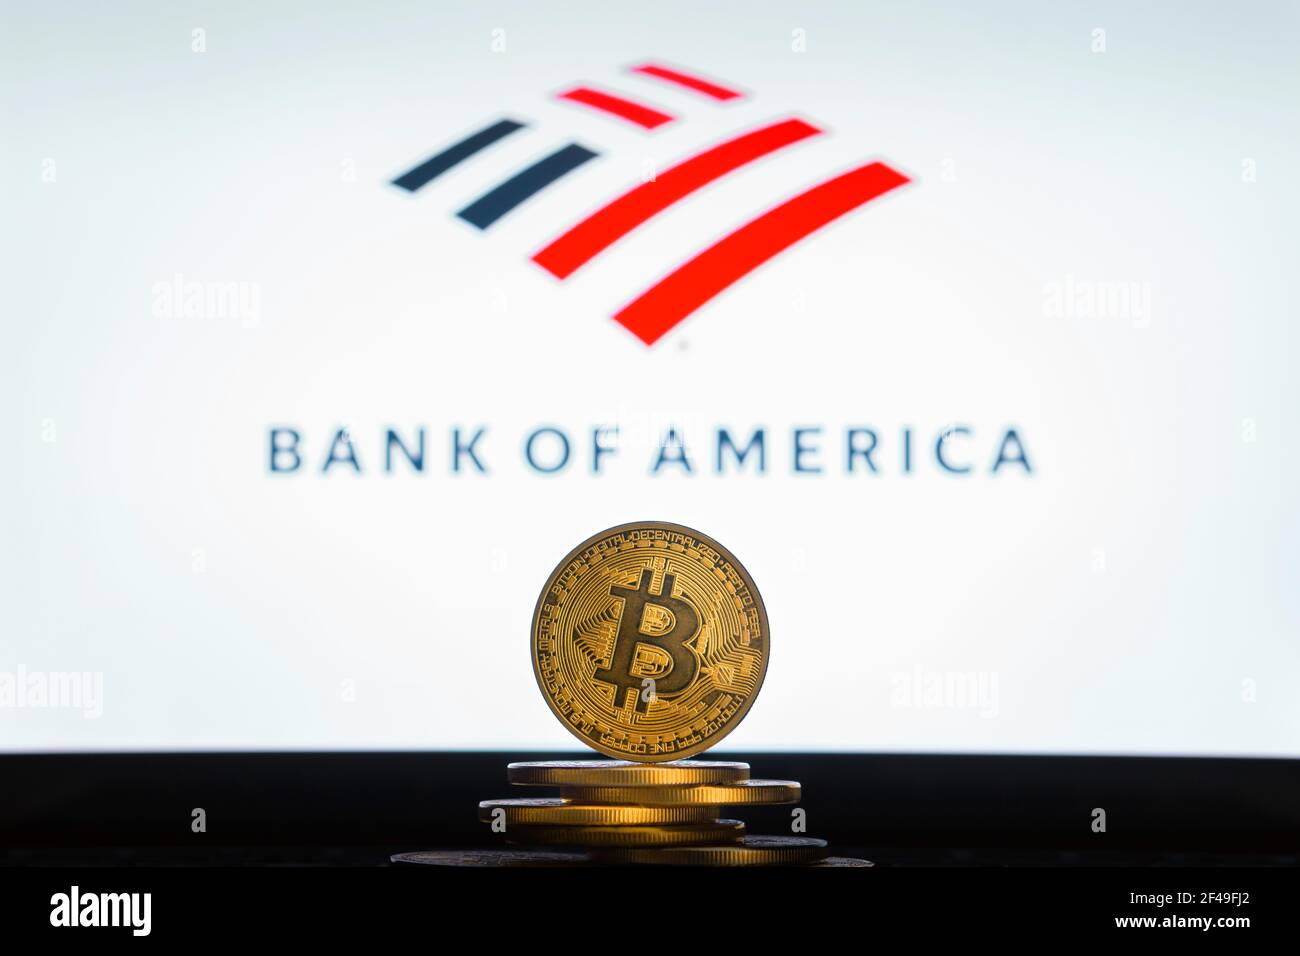 SLOVENIA, LJUBLJANA - 24 02 2019: Bitcoin on a stack of coins with Bank of America logo on a laptop screen. Stock Photo